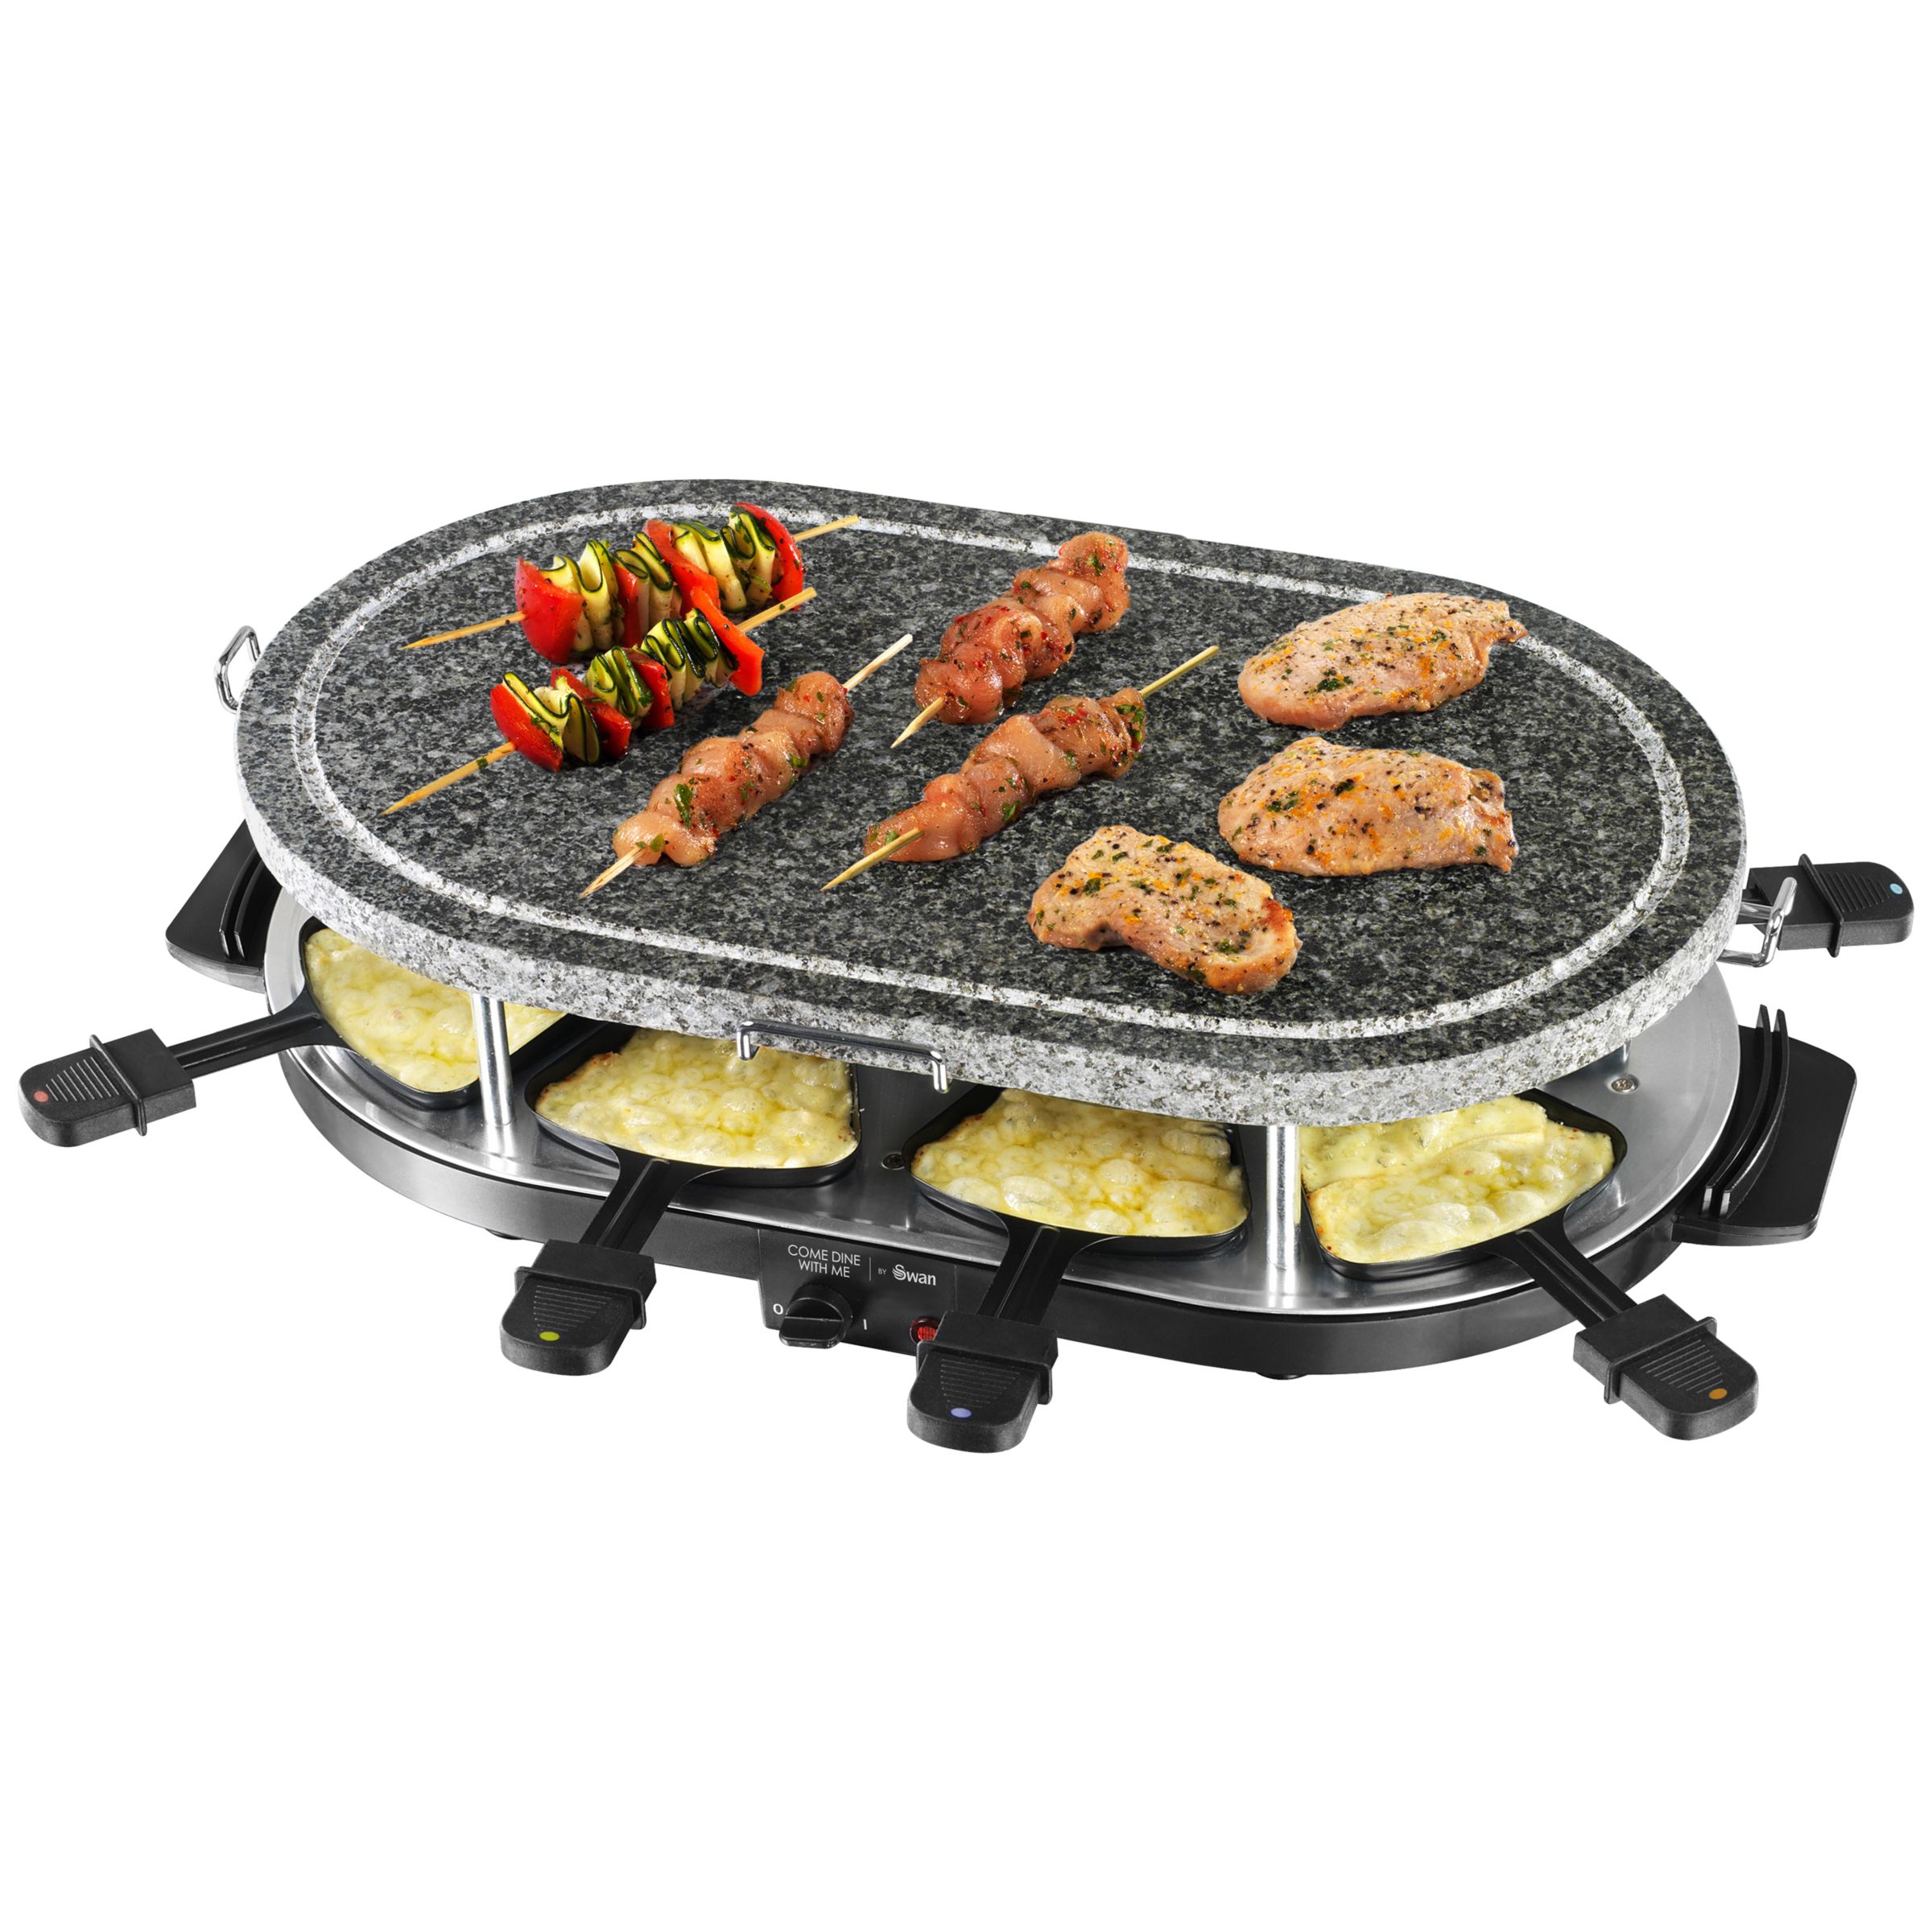 Notebook De layout Koor Swan SP17030 'Come Dine With Me' Electric Stone Griddle Raclette